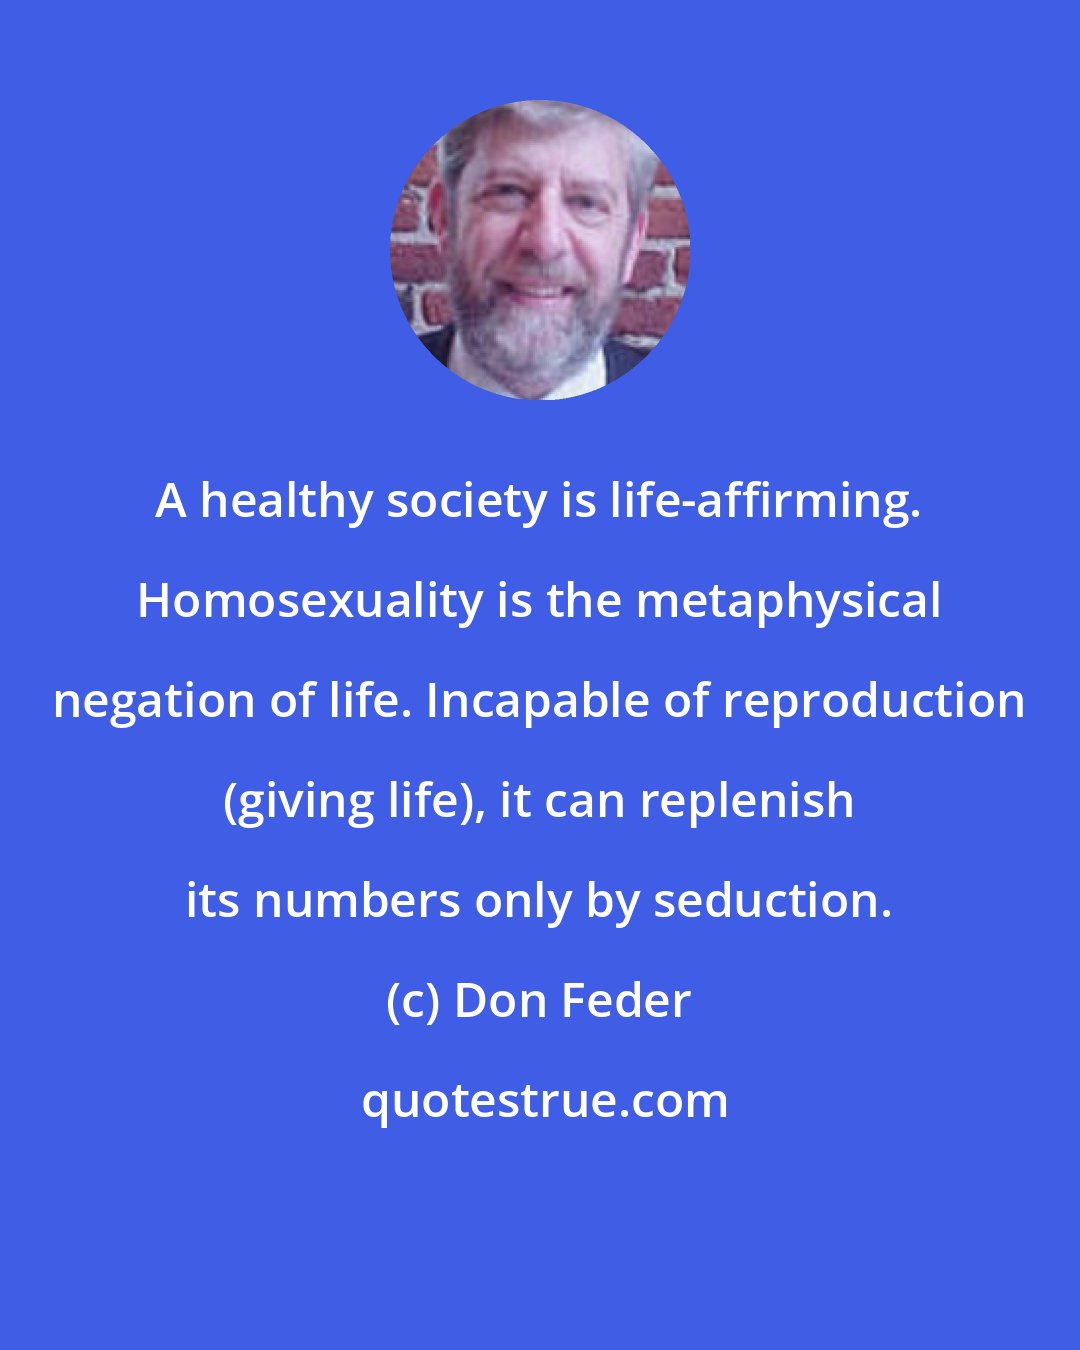 Don Feder: A healthy society is life-affirming. Homosexuality is the metaphysical negation of life. Incapable of reproduction (giving life), it can replenish its numbers only by seduction.